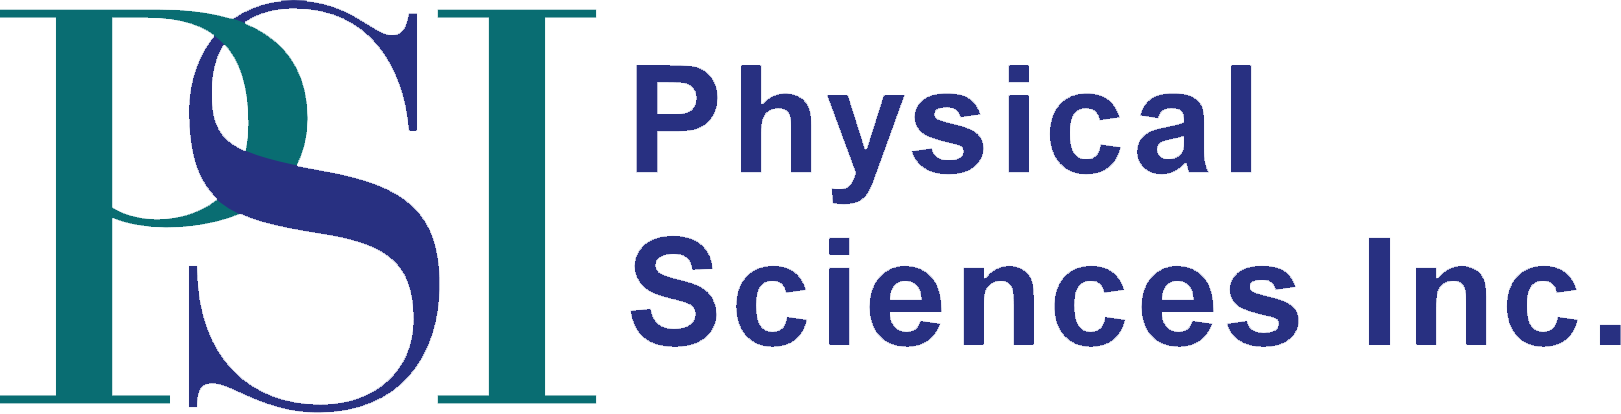 phyical-sciences-logo.png